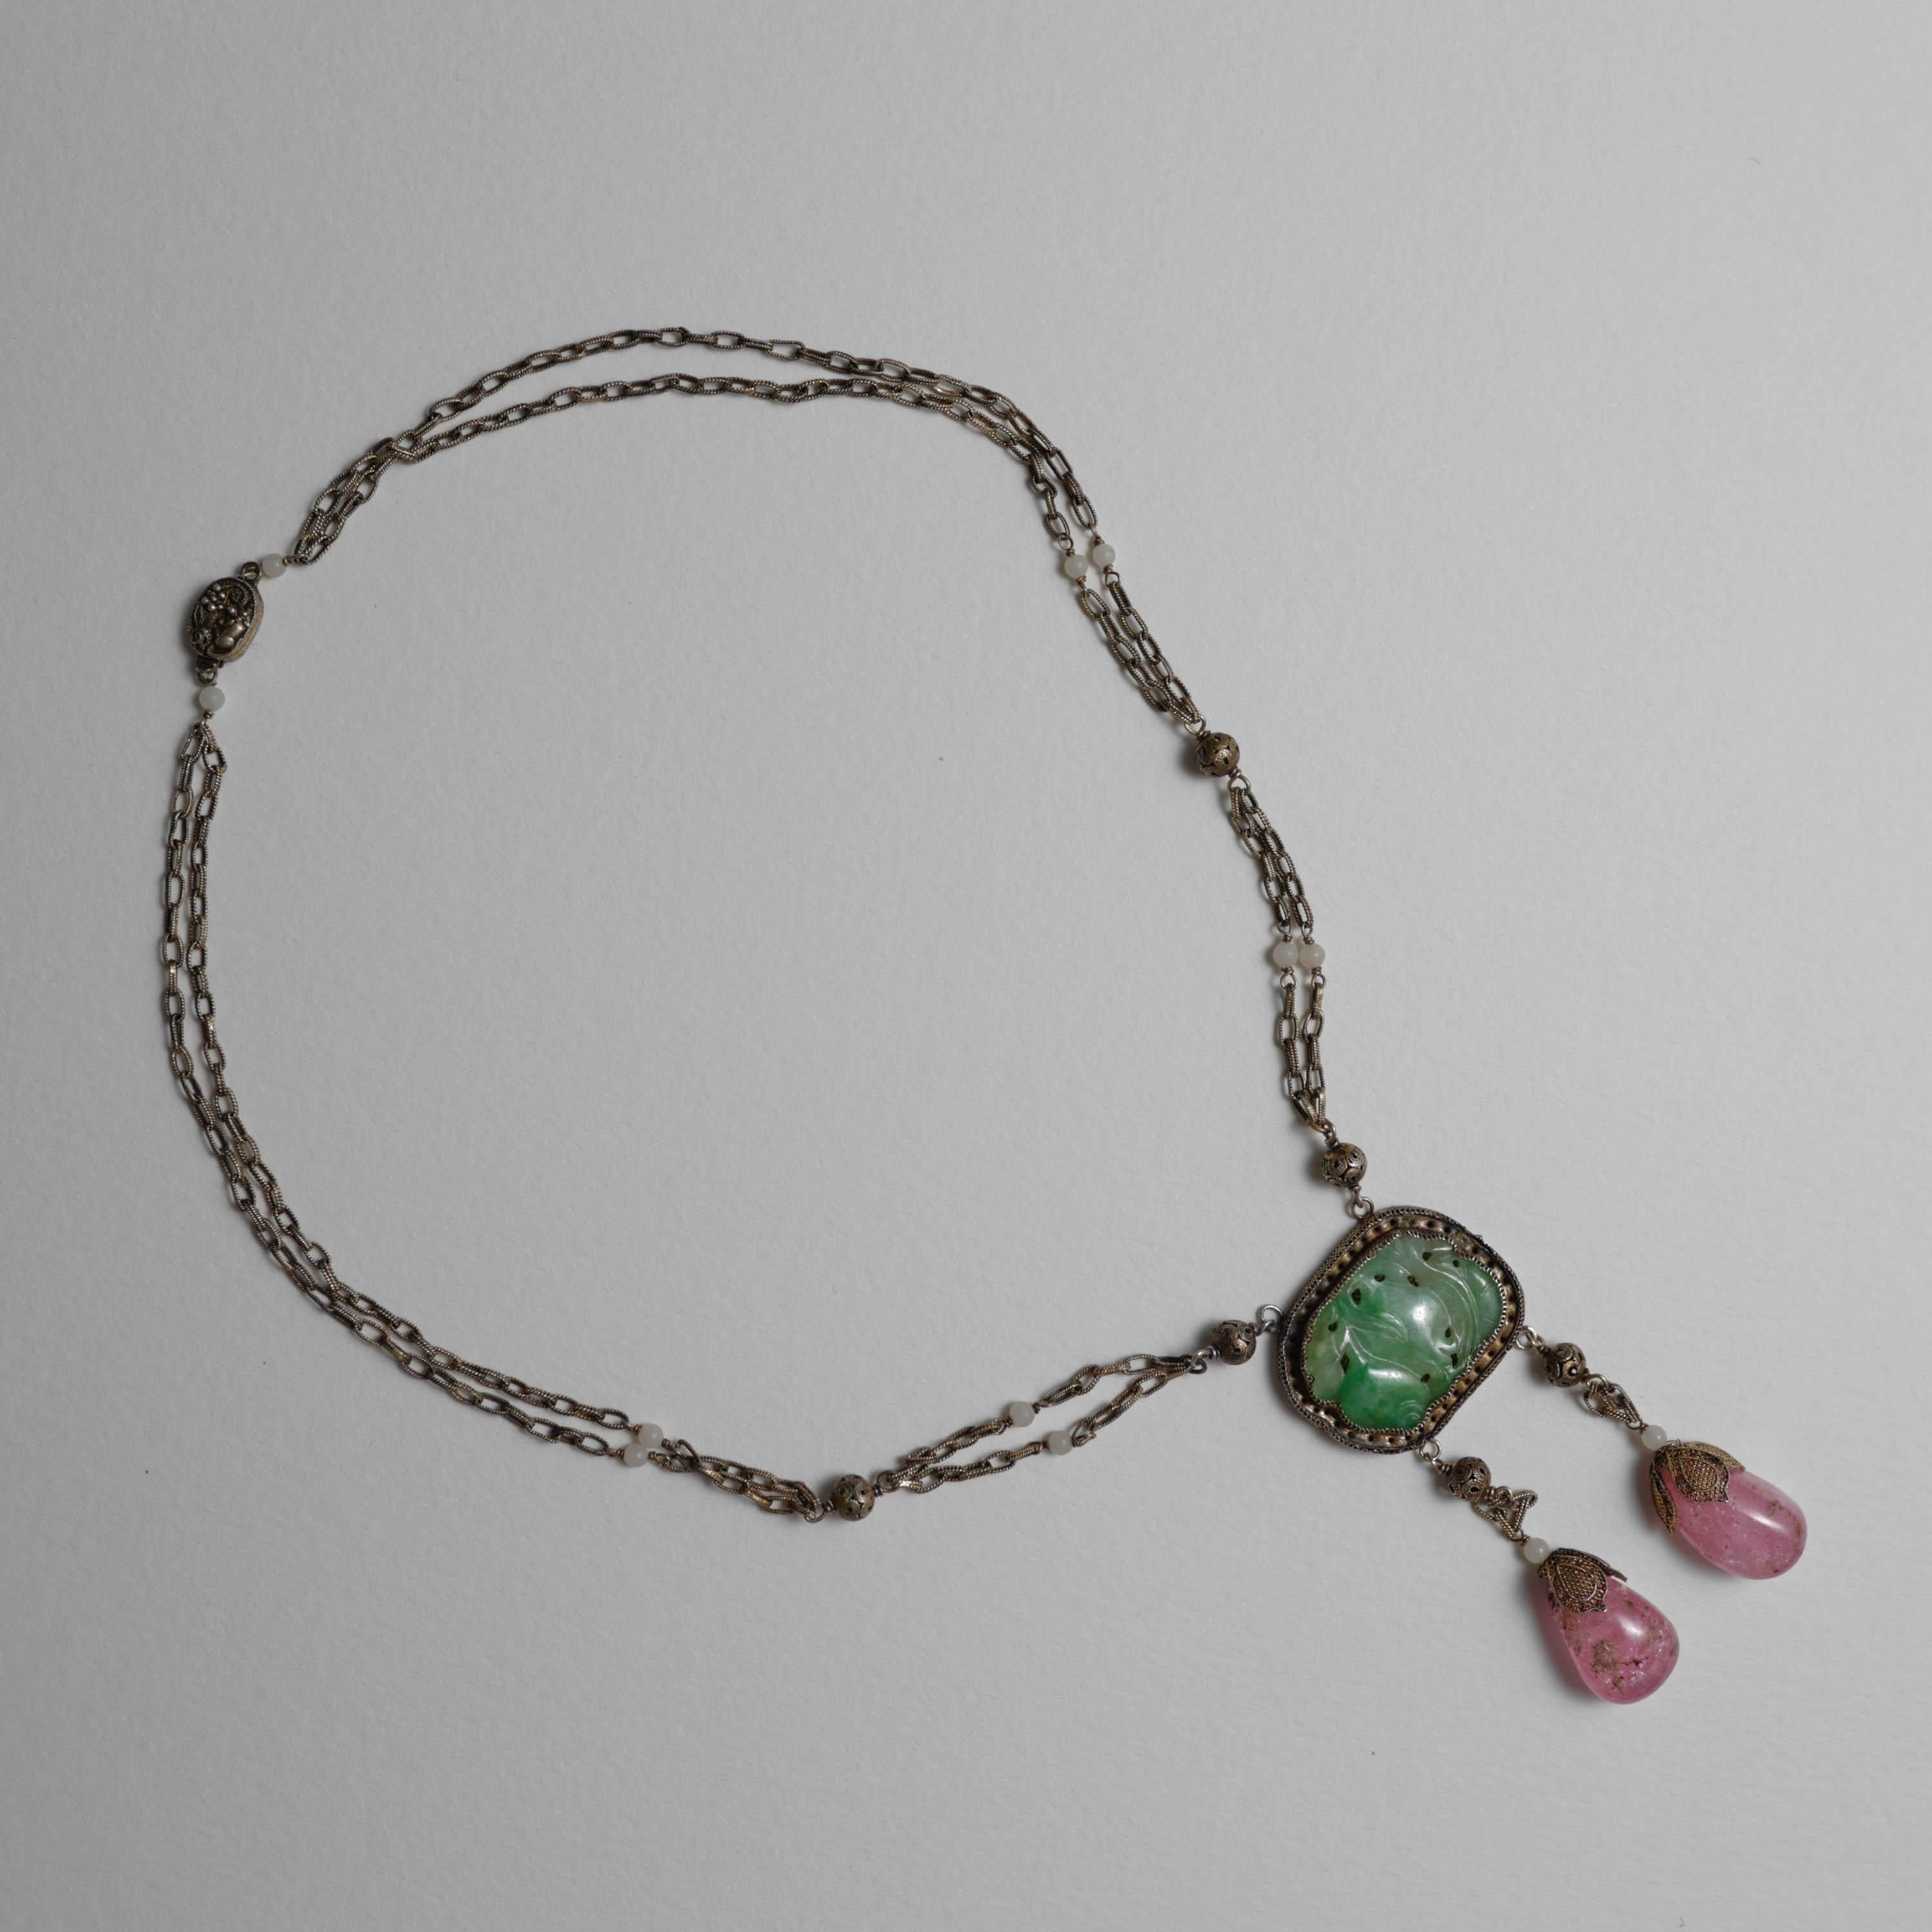 Created just after the turn of the century (circa 1917), this gilt silver jadeite and tourmaline drop necklace was created in China for the export market. Intricately detailed wirework that today would be nearly impossible to create by hand was